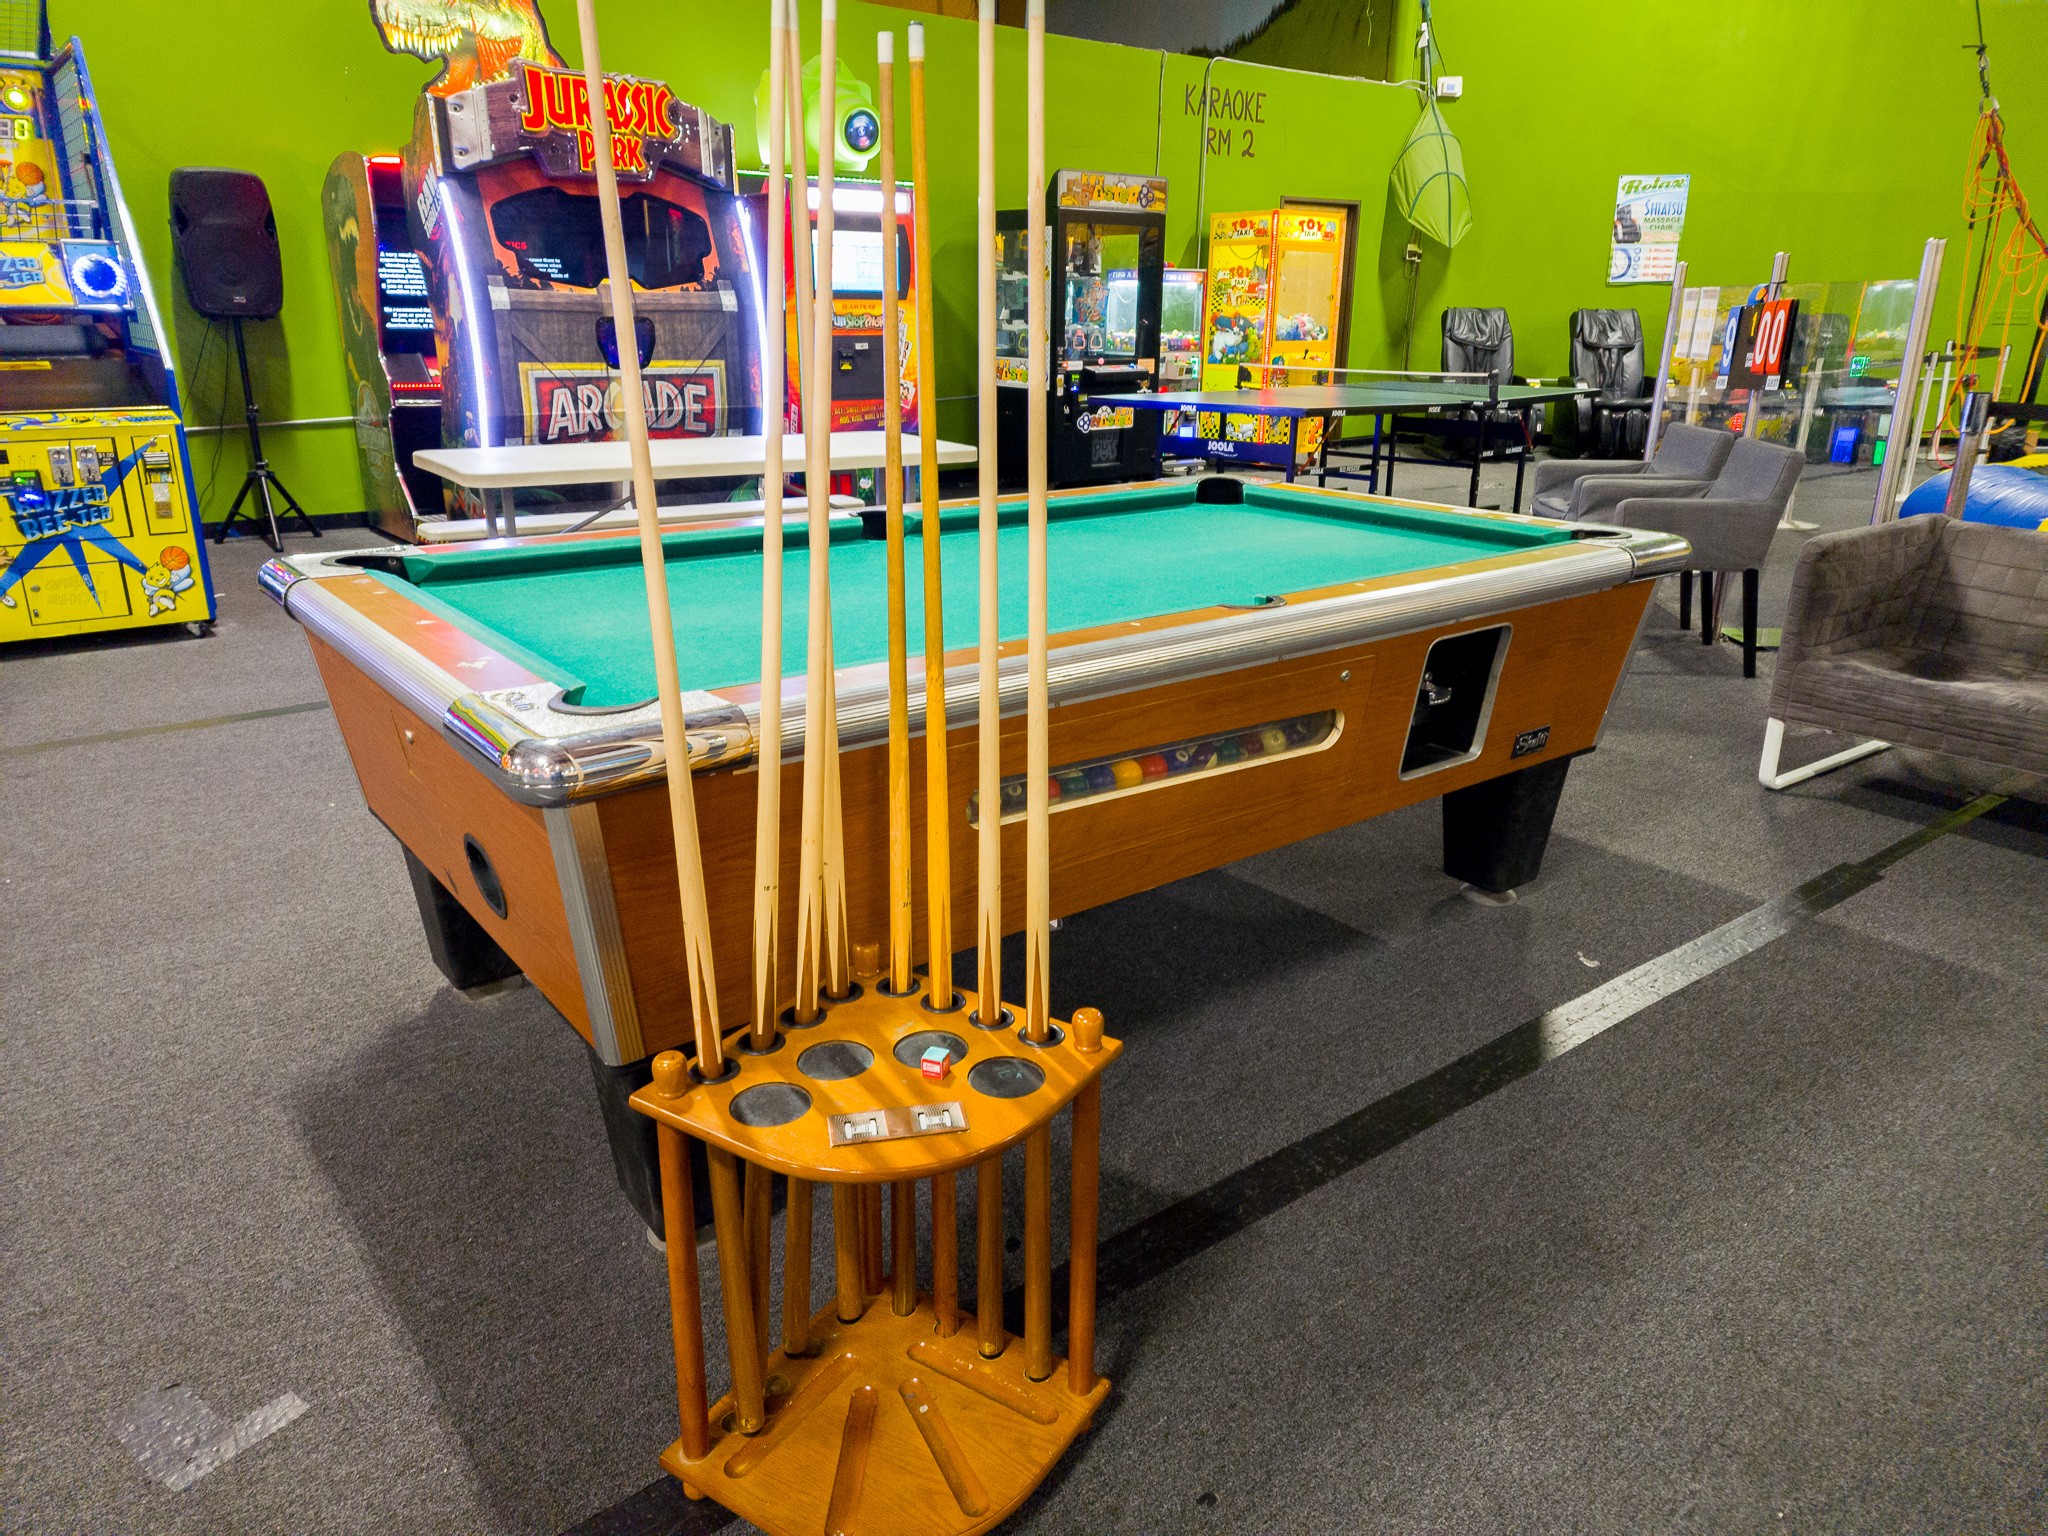 Jump Party USA has two Billiards table with pool sticks. Perfect way for adults to pass time while the kids jump